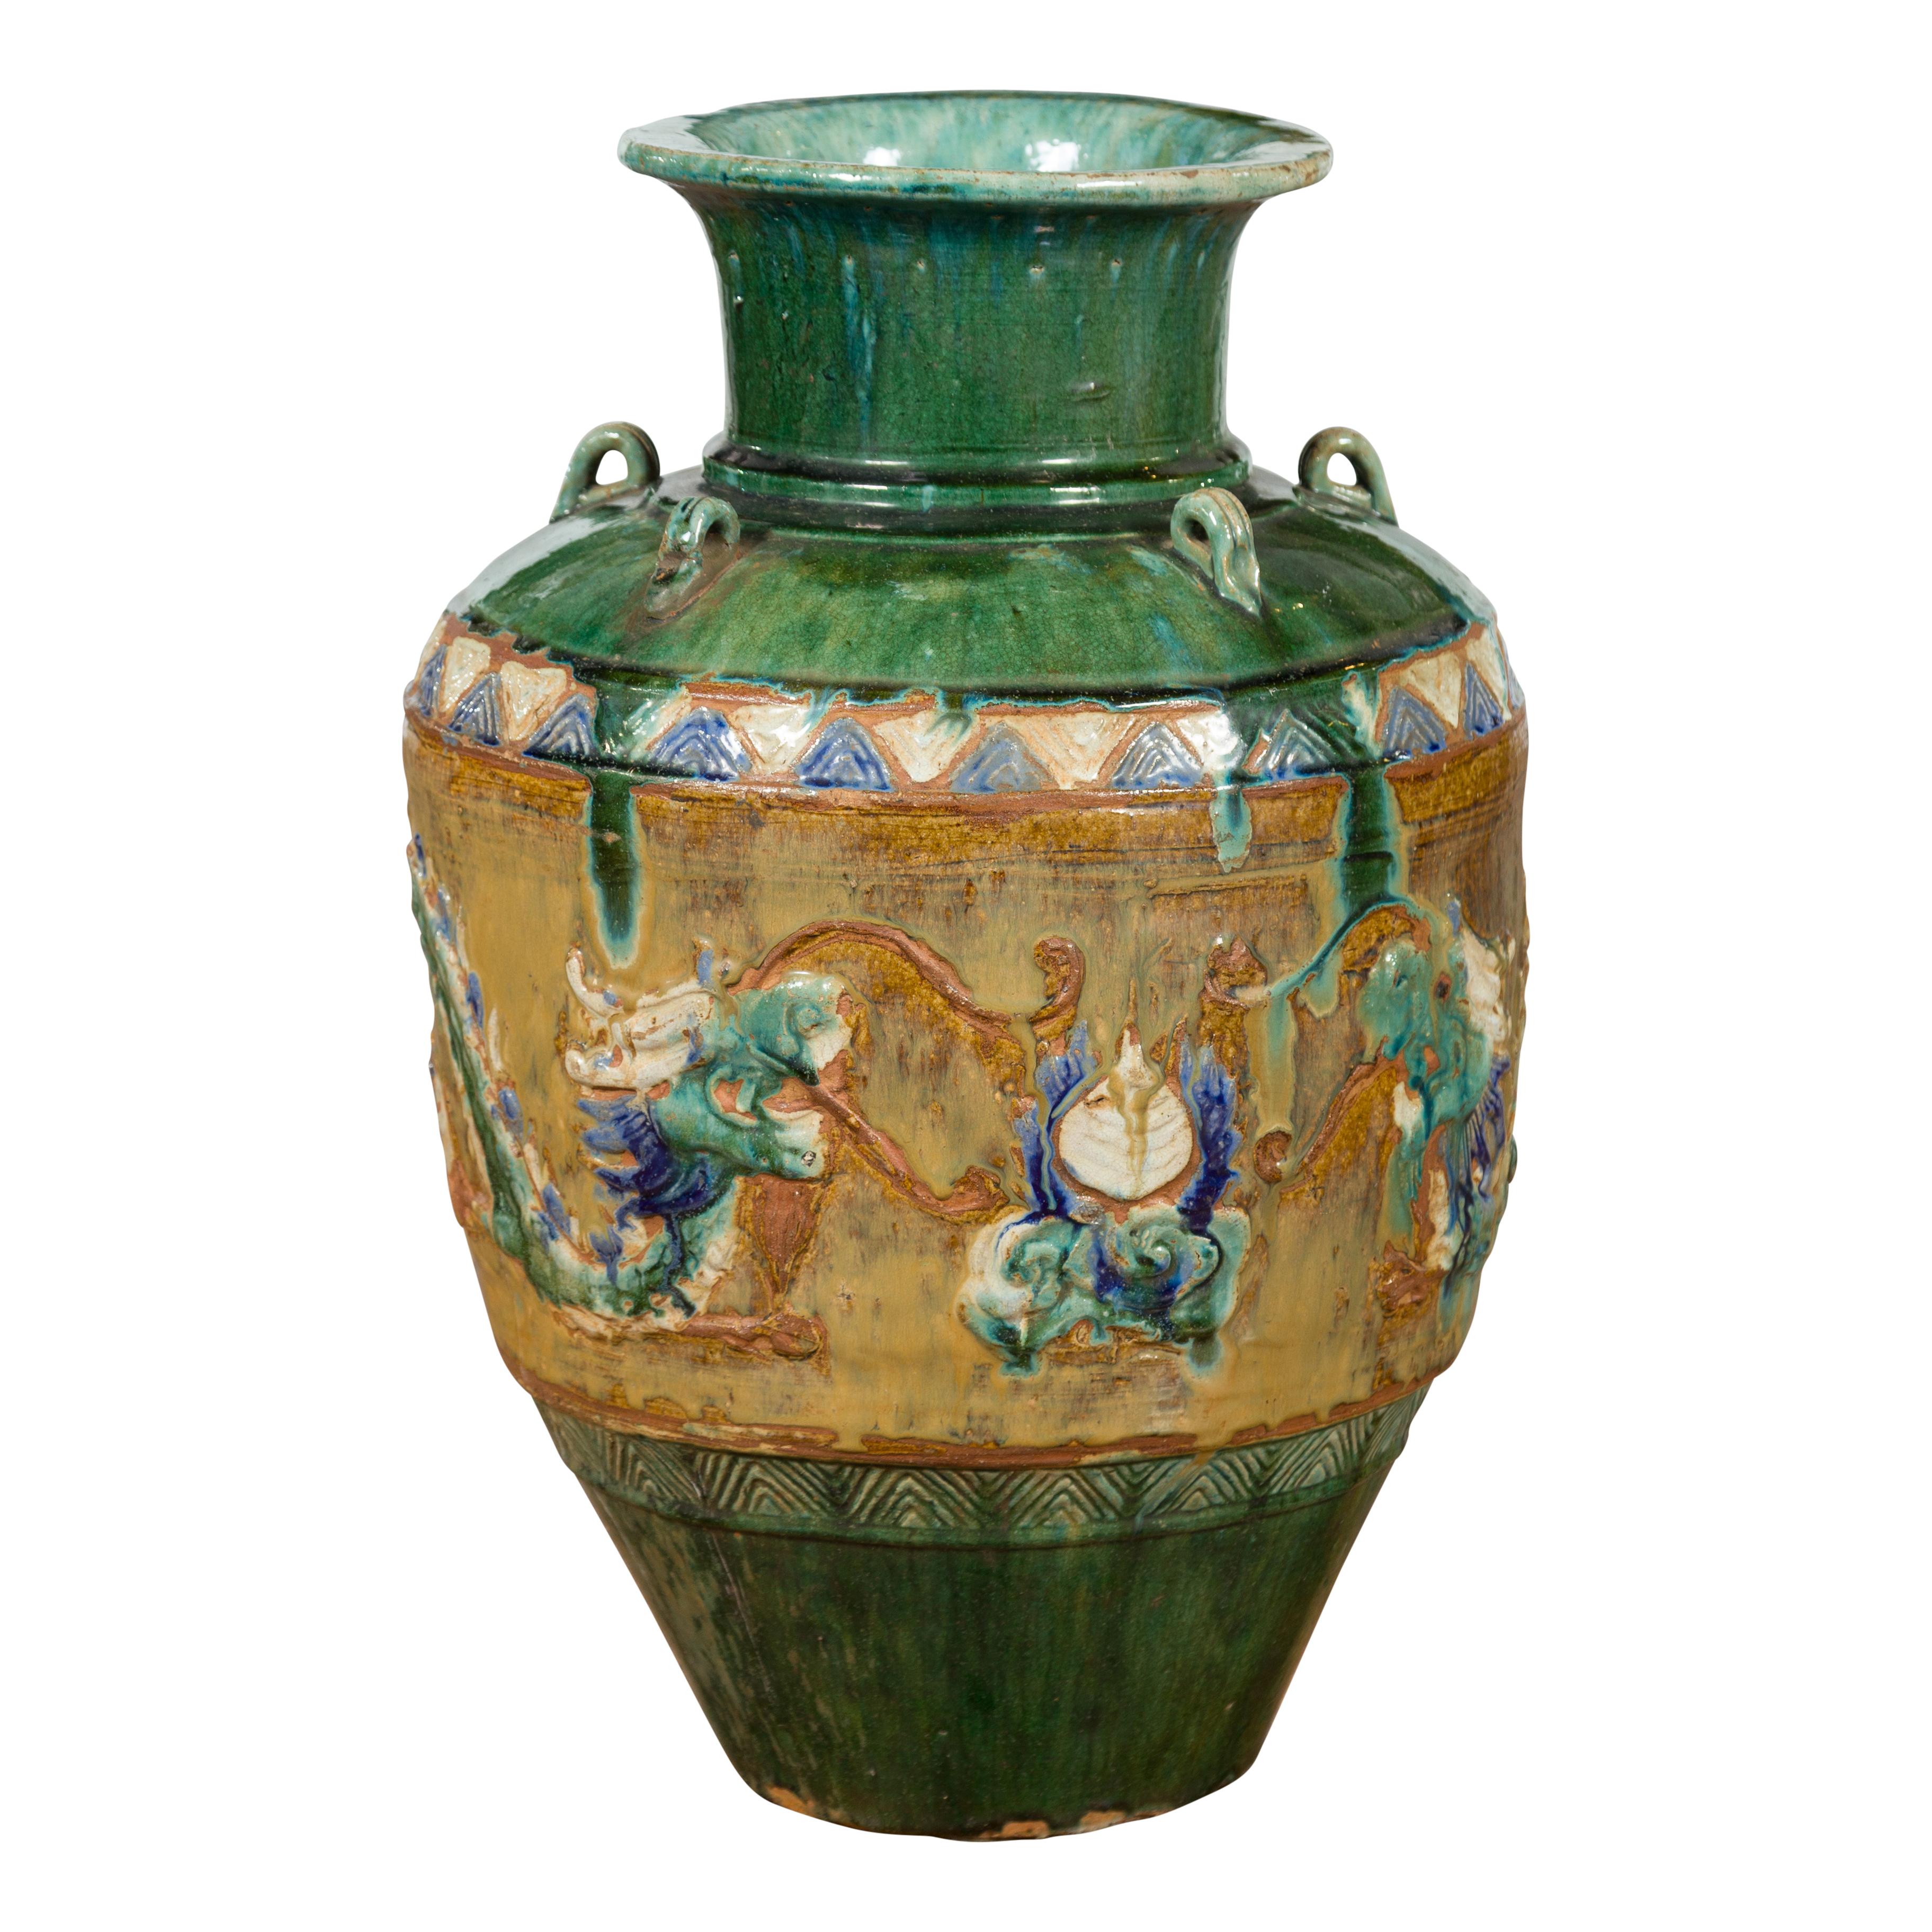 An antique Vietnamese Annamese green water jar from the 17th century, with dragon motifs and petite loop handles. Created in Vietnam during the 17 century, this green glazed Annamese Martaban vase is adorned with a series of petite loop handles